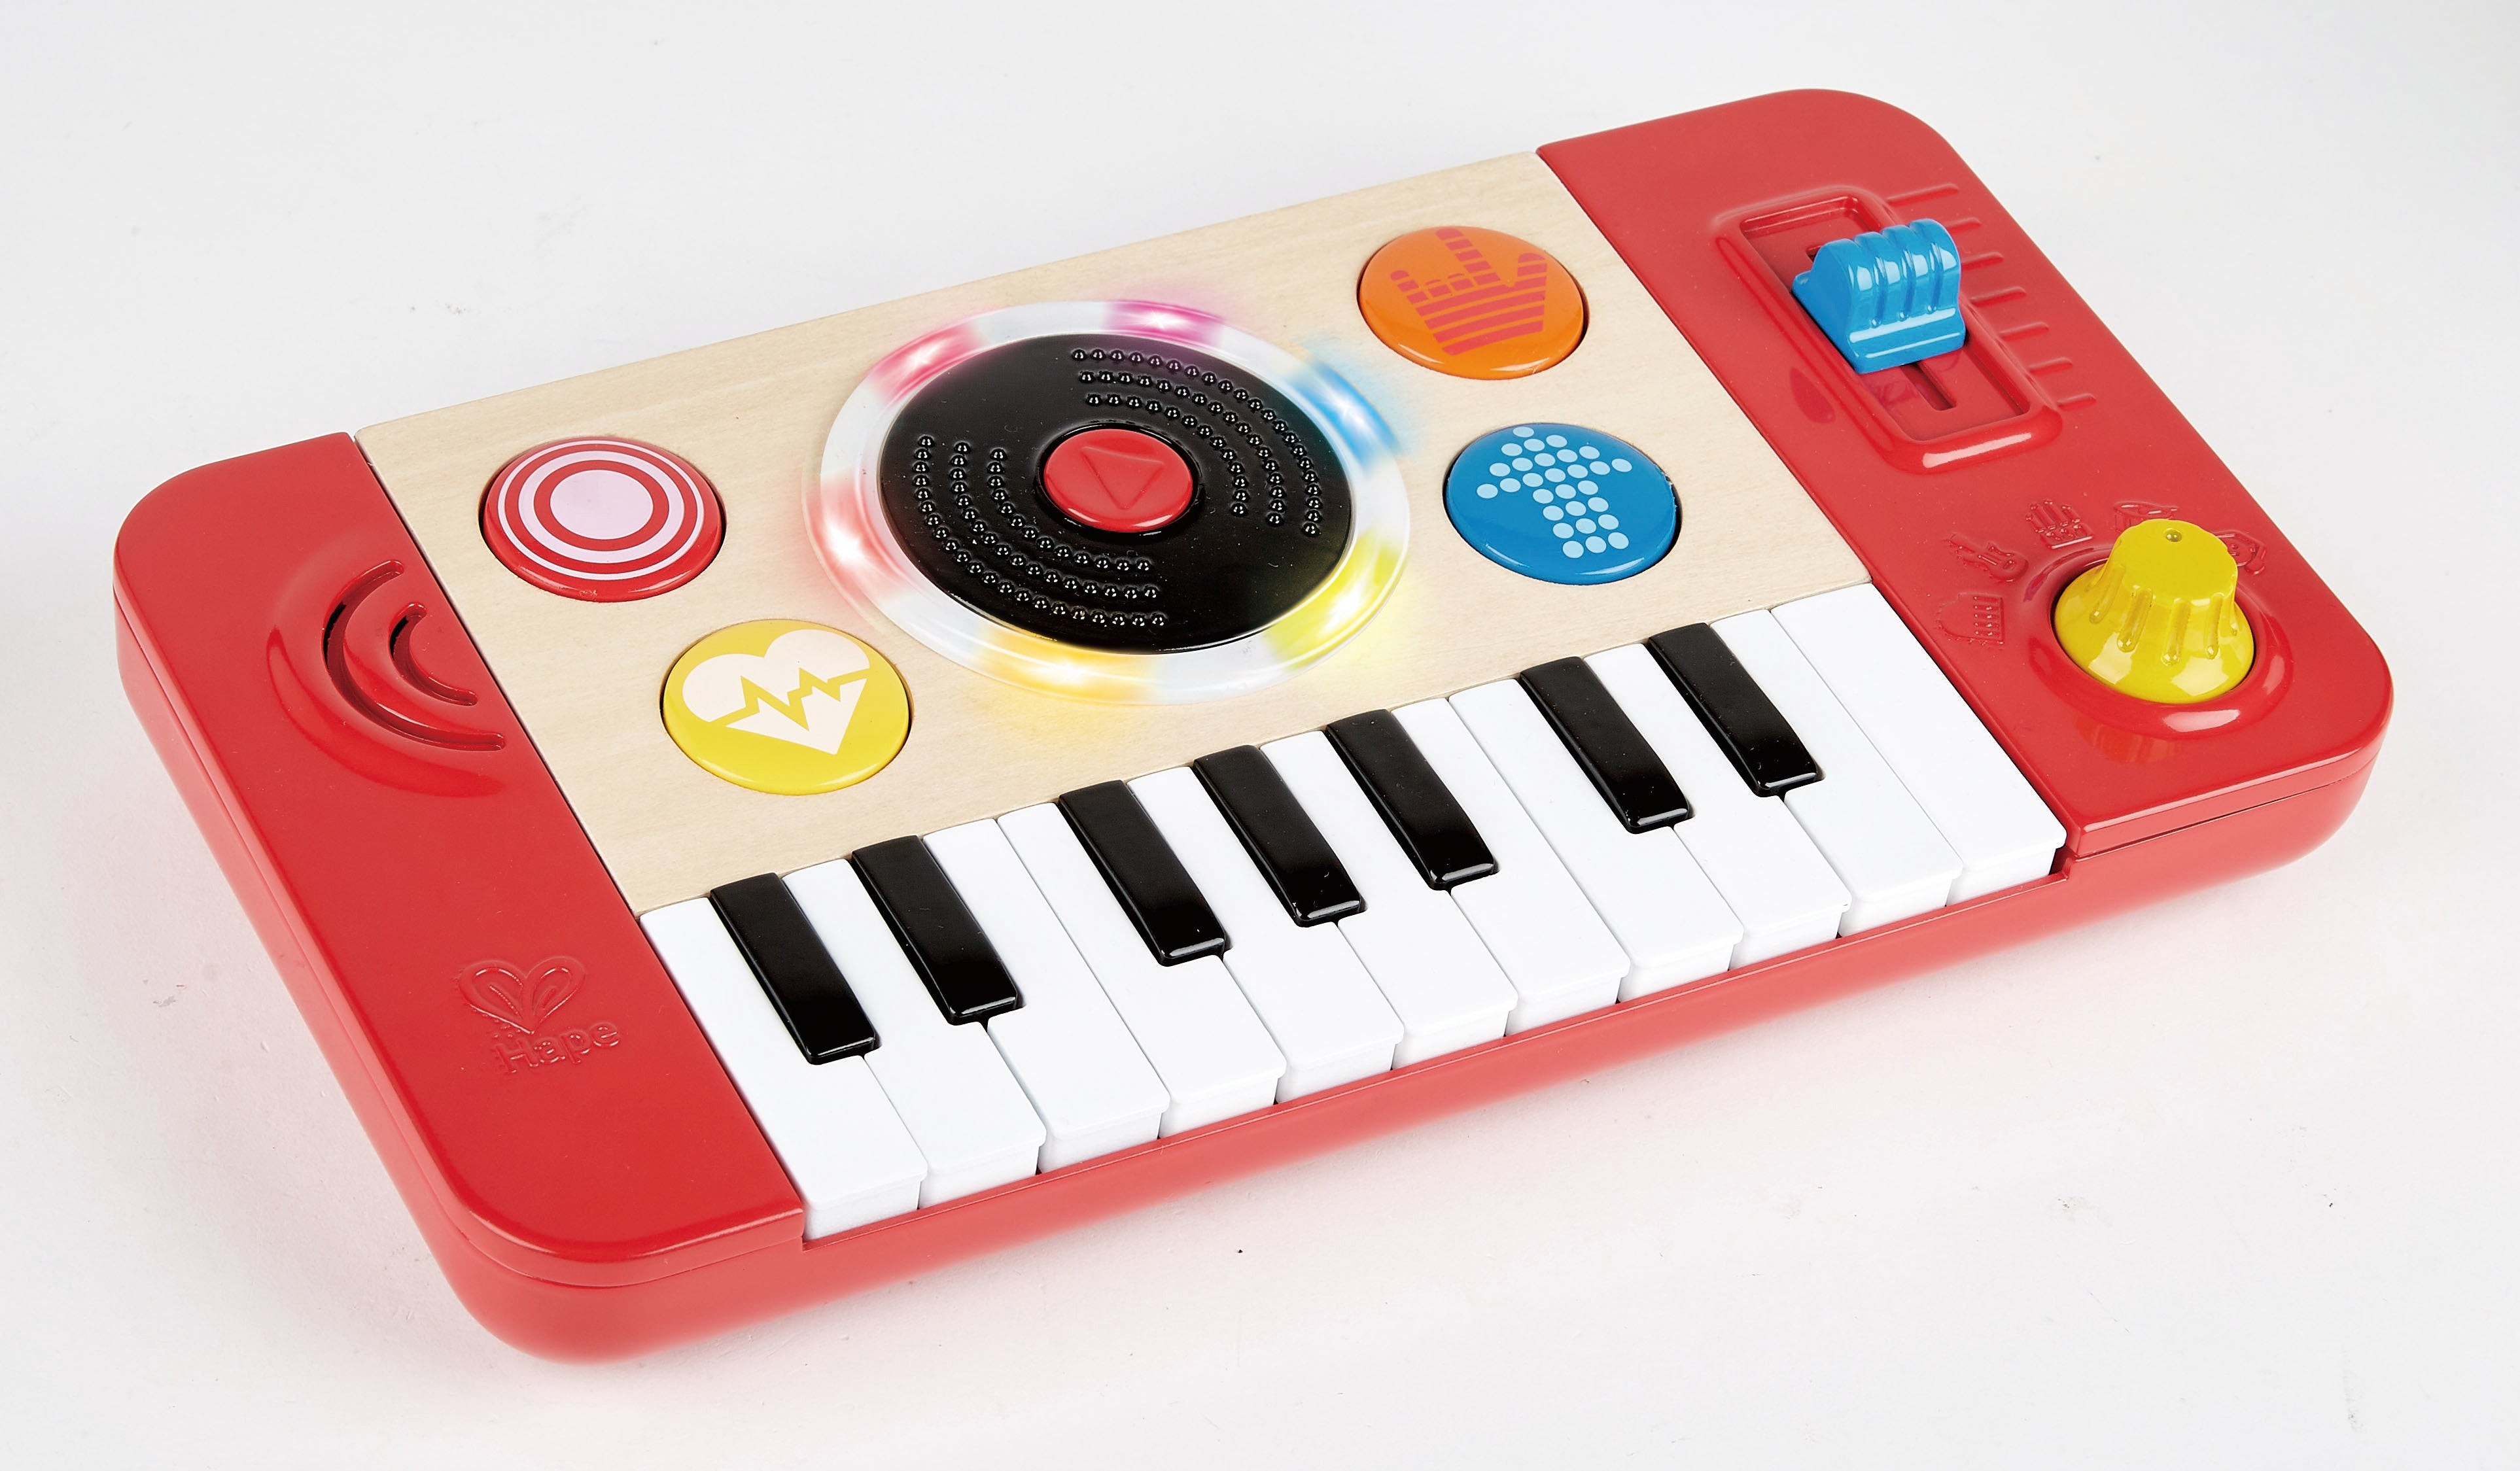 DJ Mix & Spin Studio Musical Toy - Ages 12+ Months Red